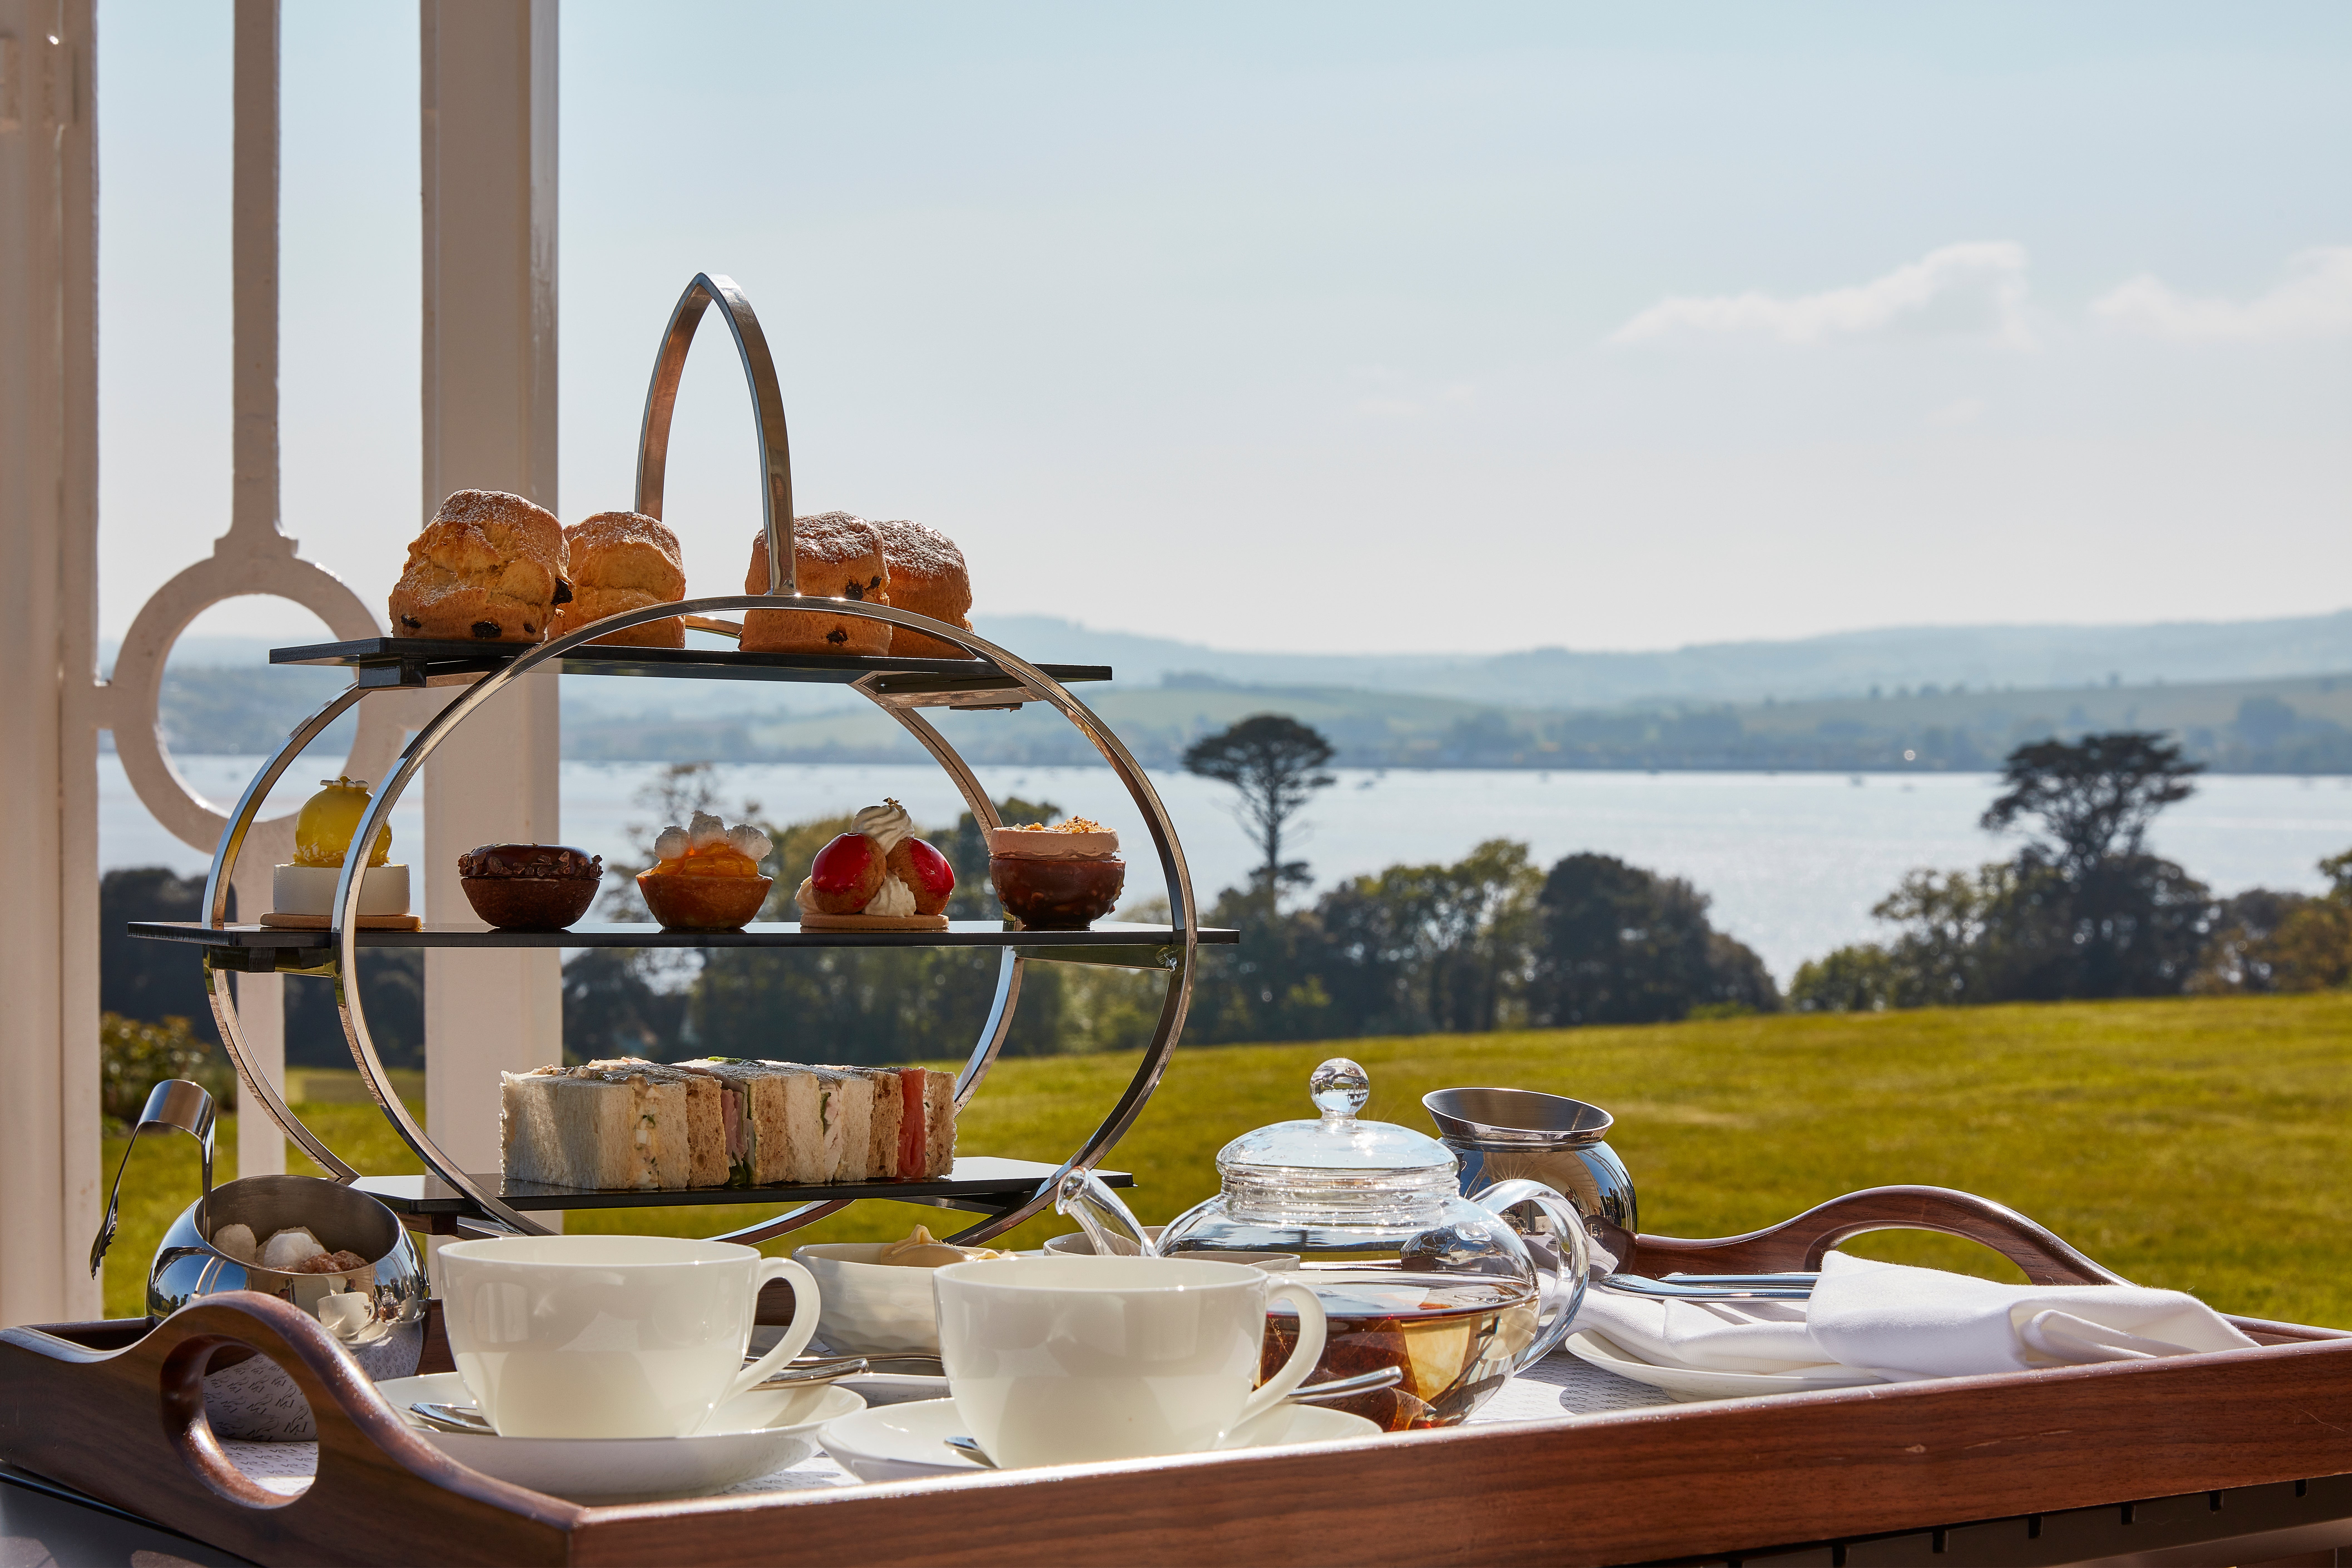 Relax with afternoon tea, served by the manor’s Michelin-star kitchen